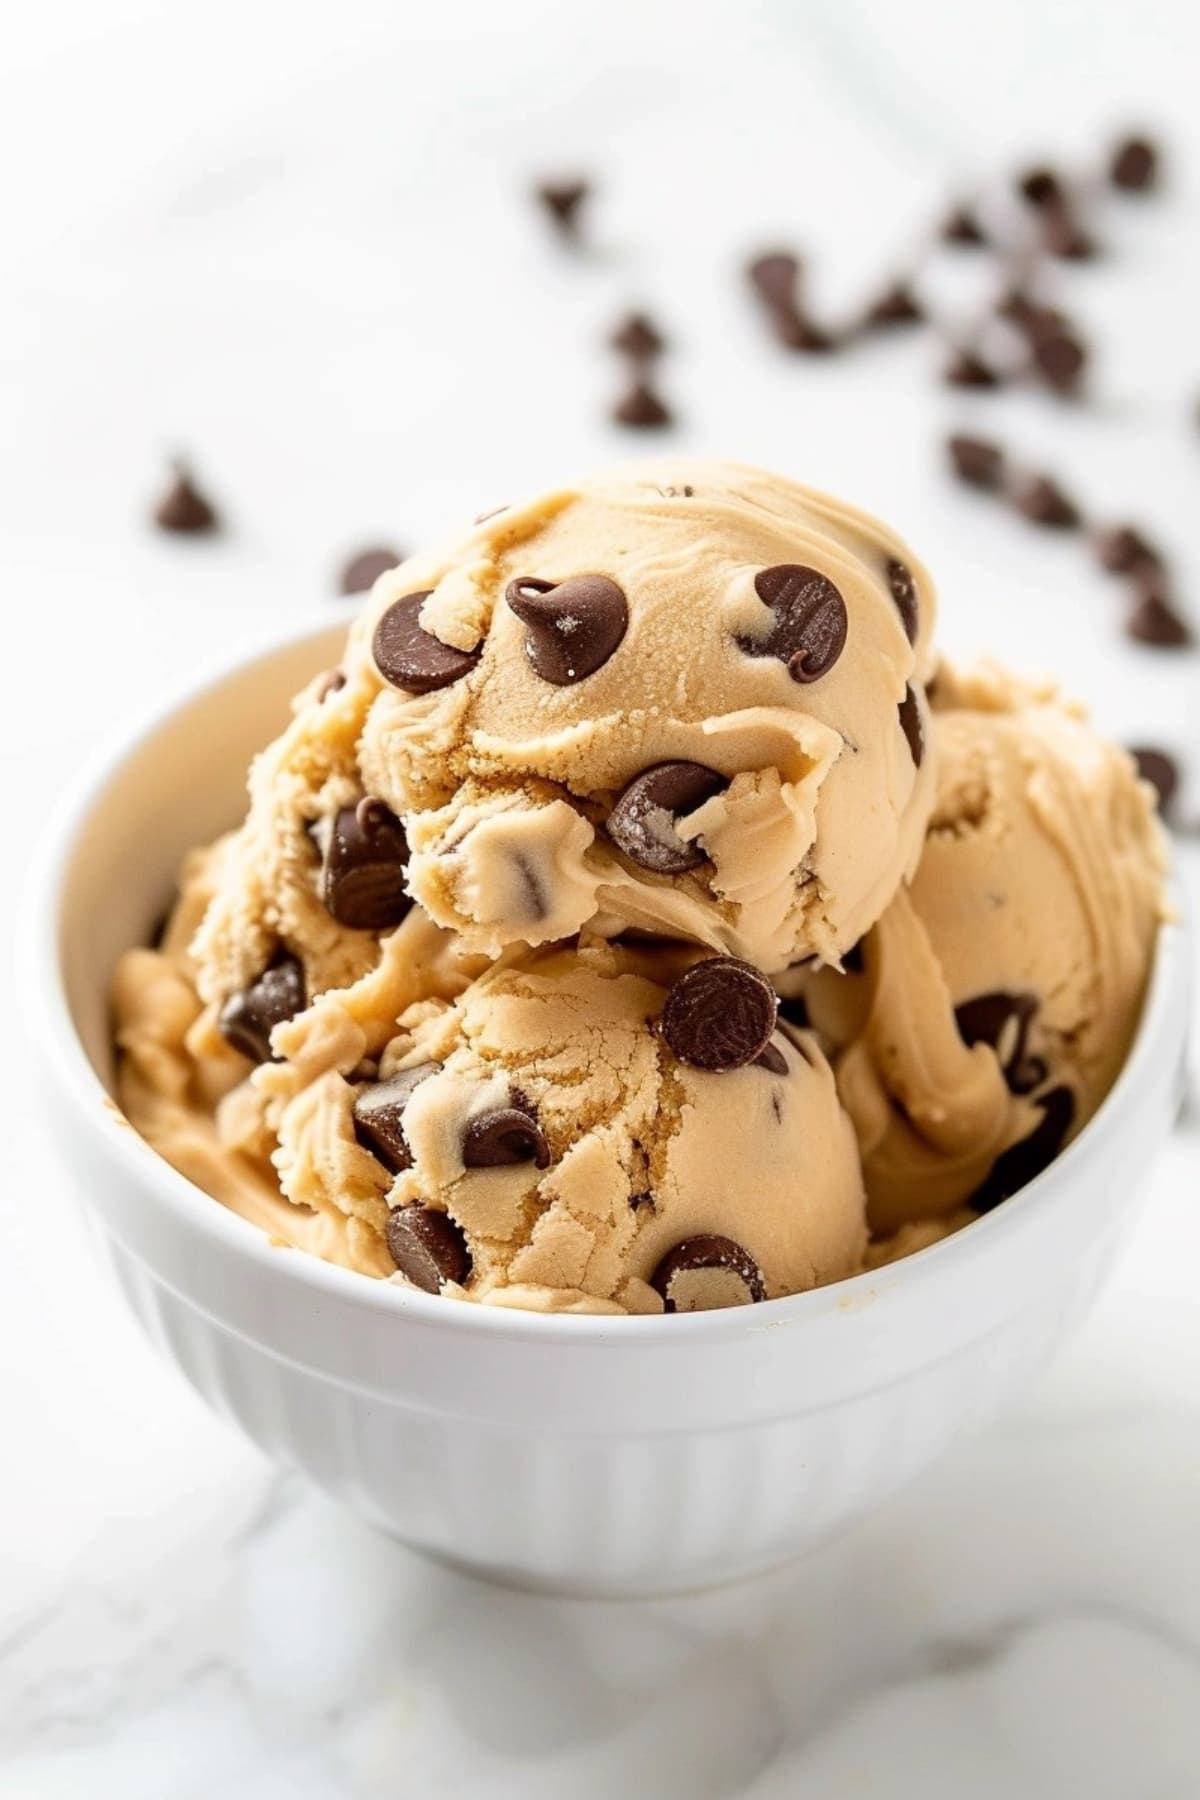 Scoops of edible cookie dough with chocolate chips in a bowl.